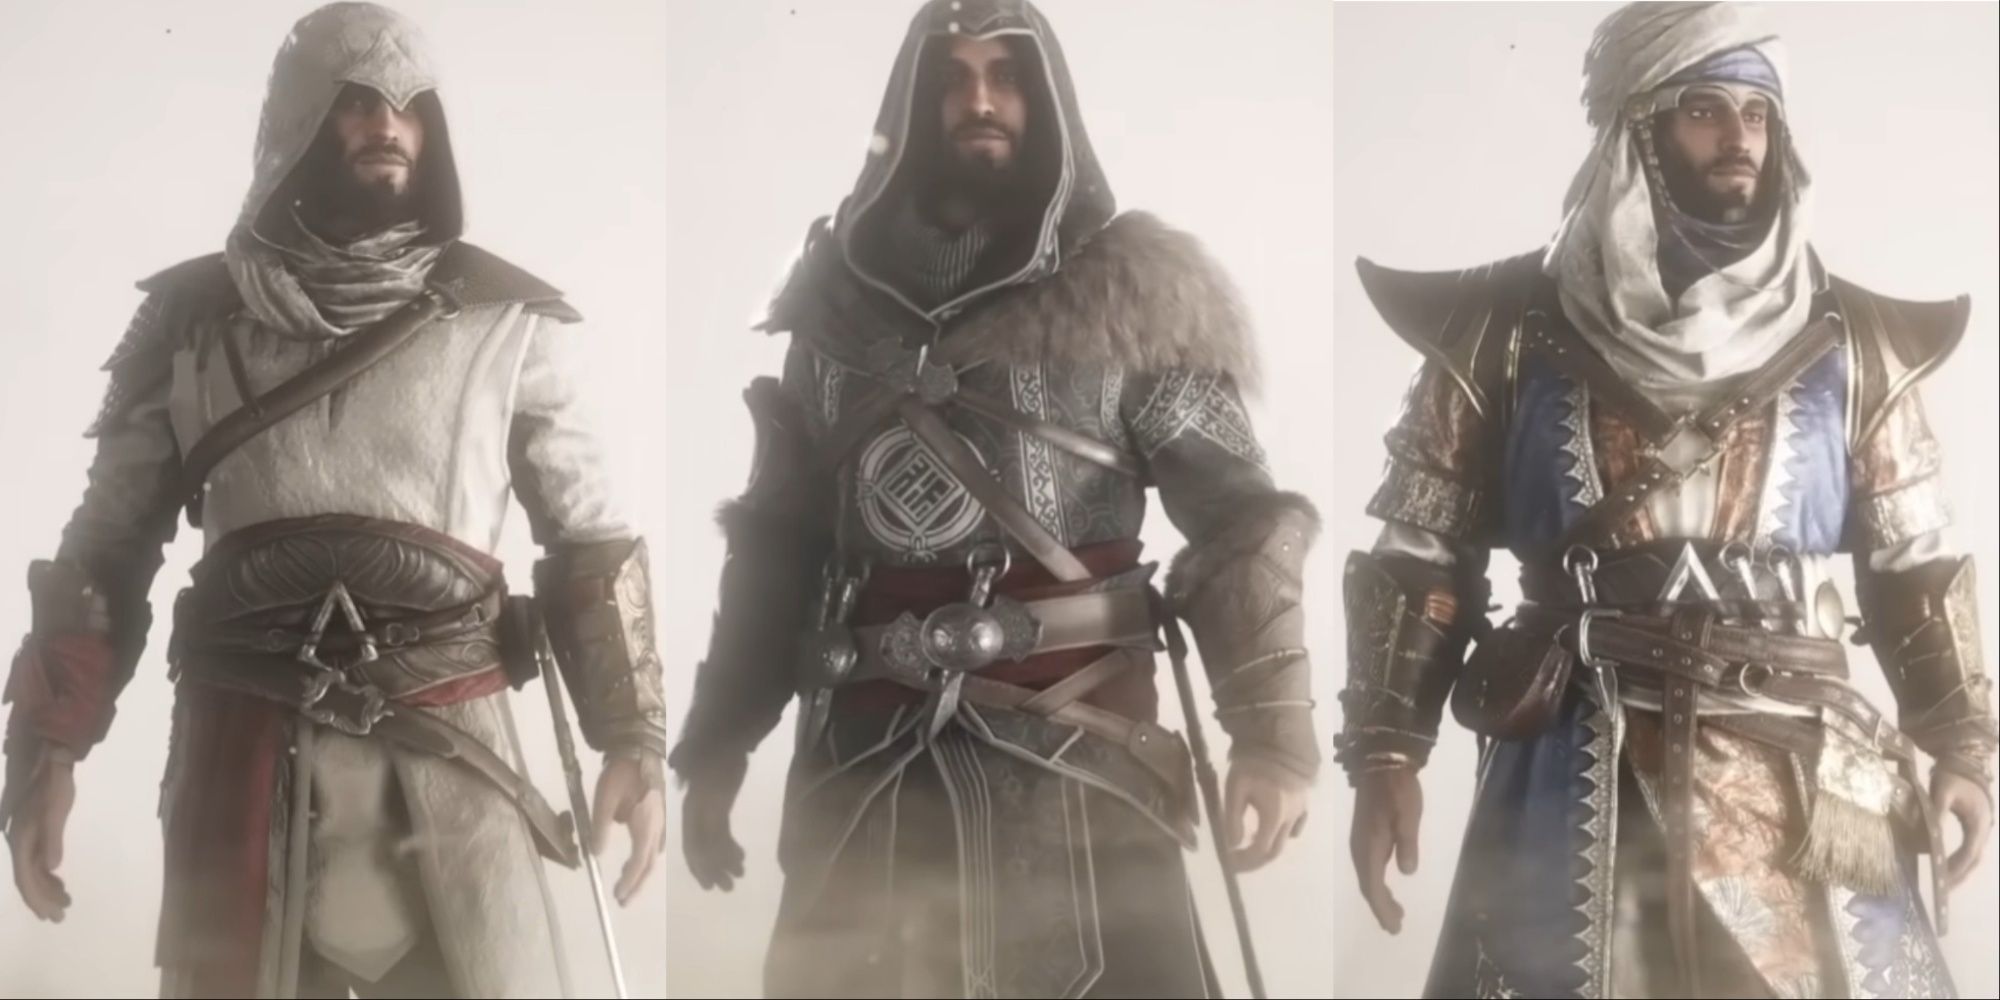 Ranking the Special Assassin Outfits